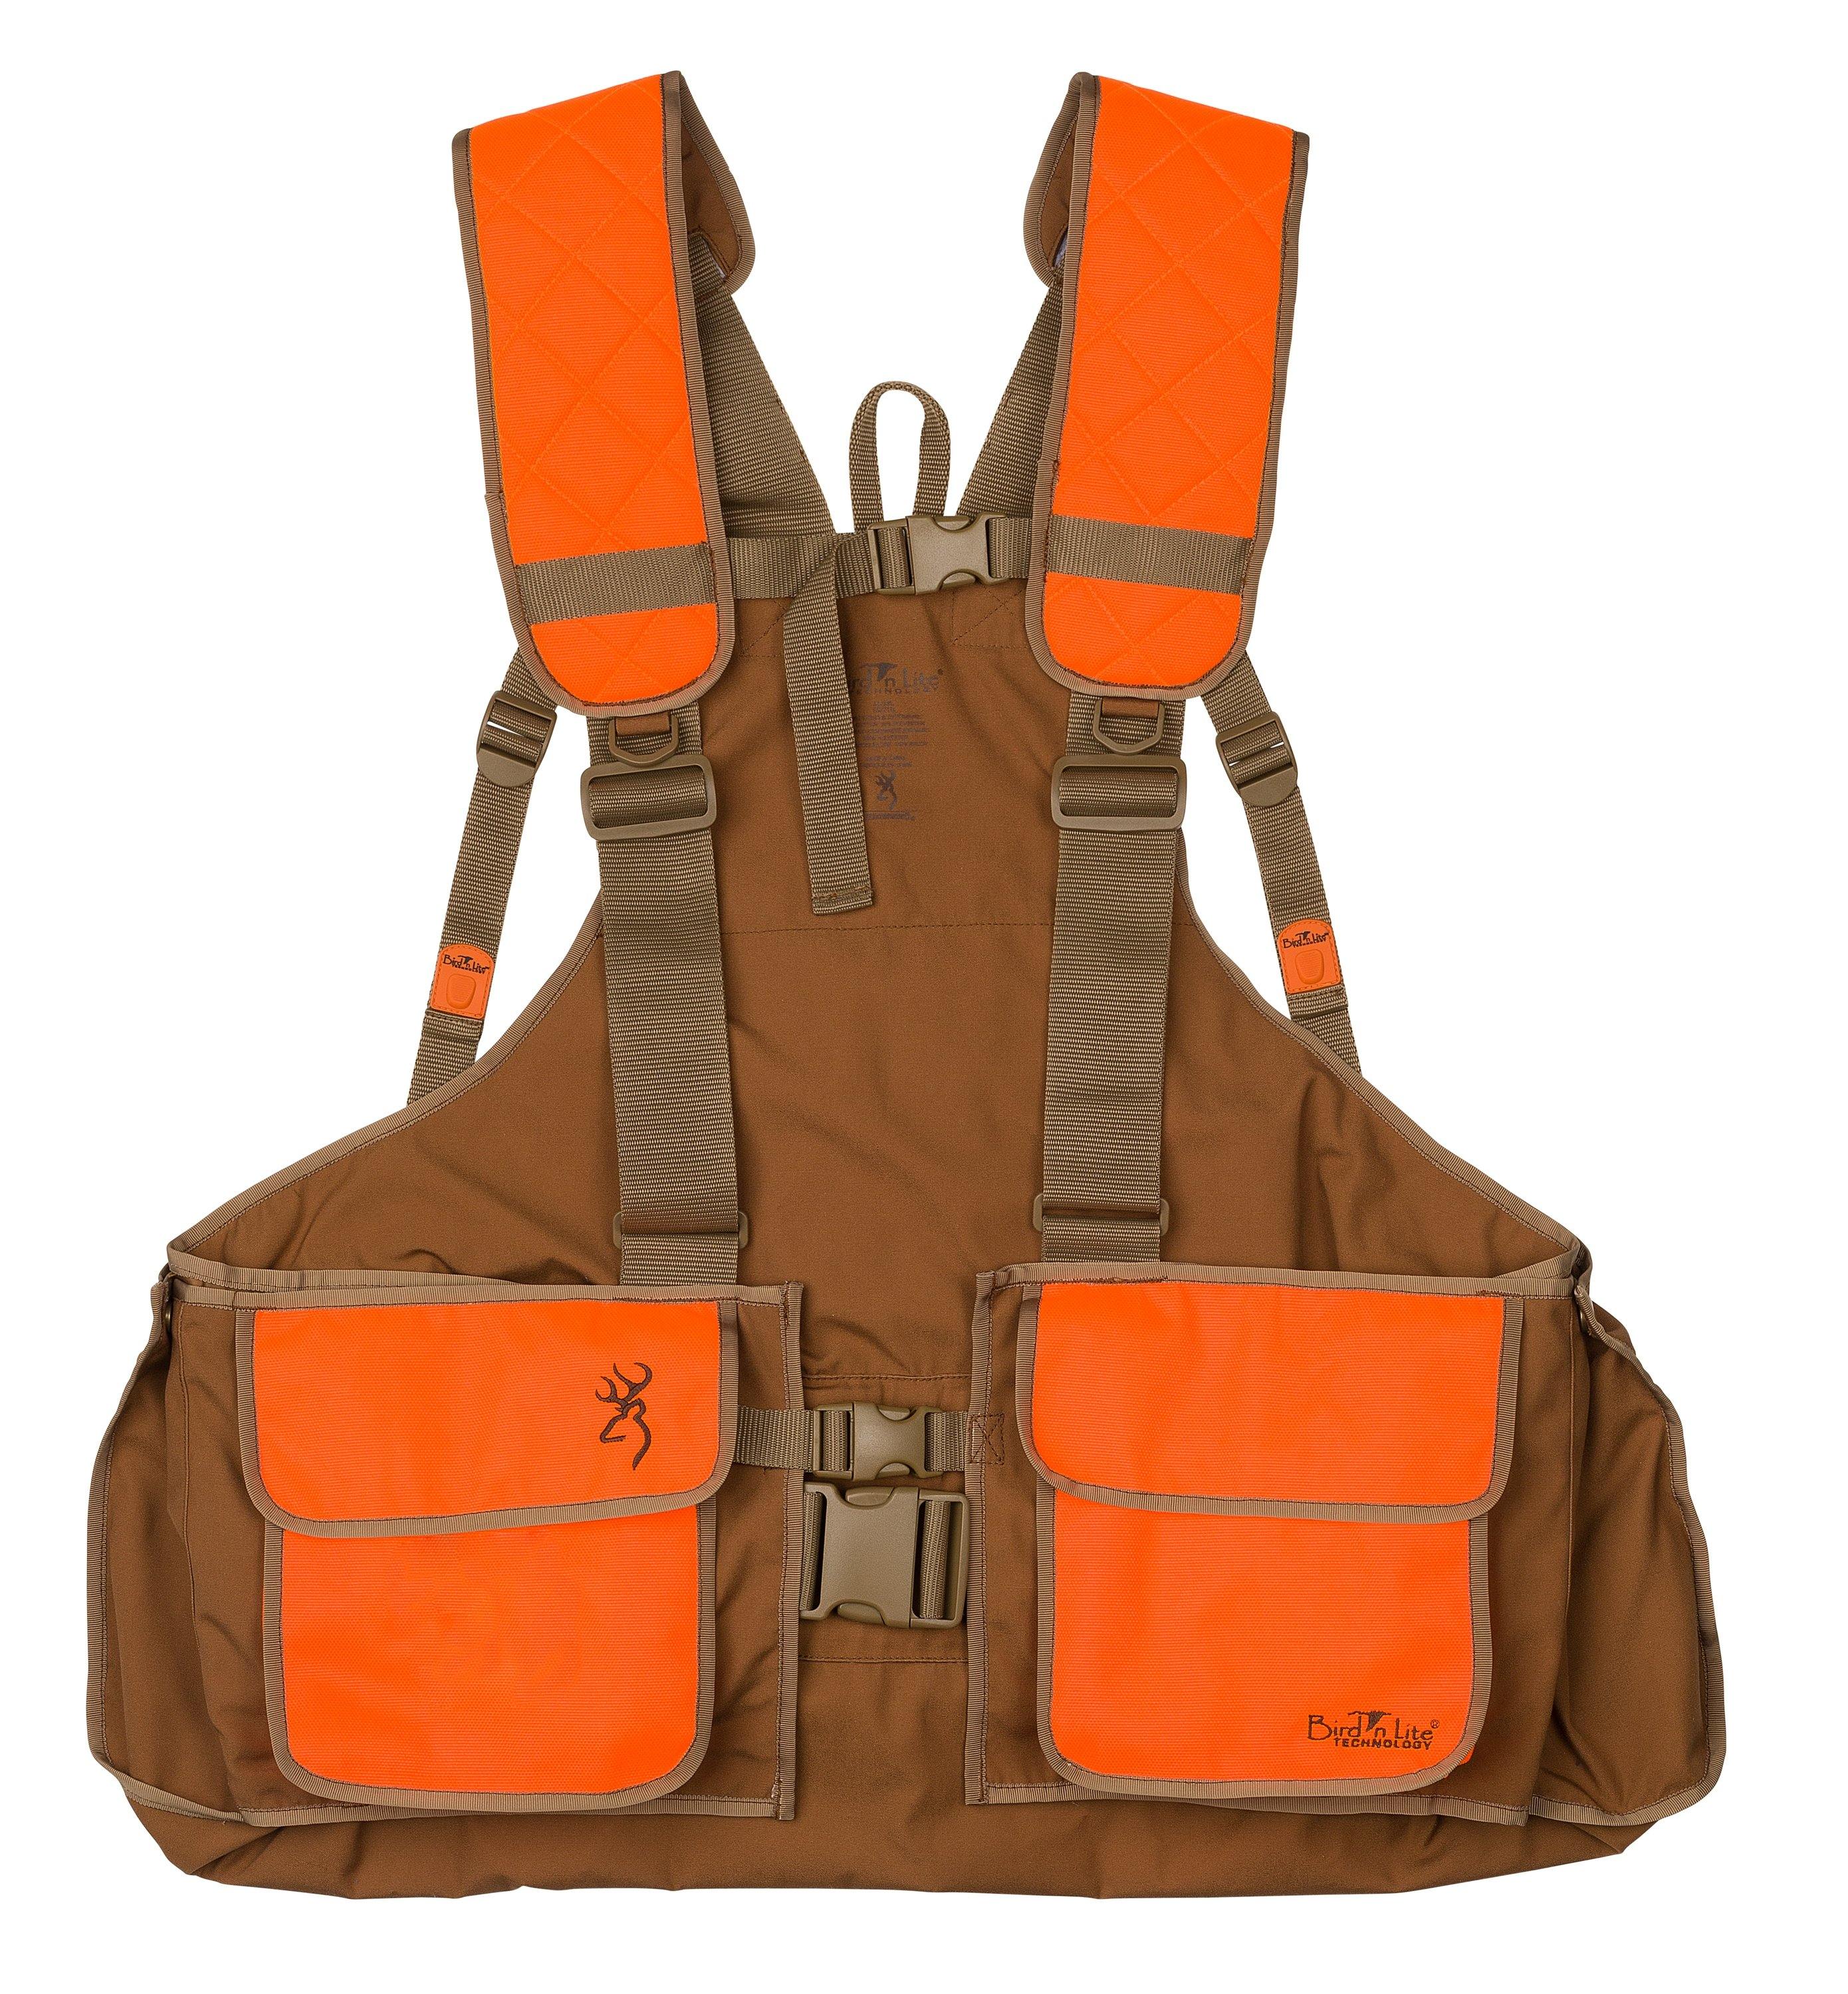 Browning Upland Bird’n Lite Strap Vest 2.0 - Leapfrog Outdoor Sports and Apparel